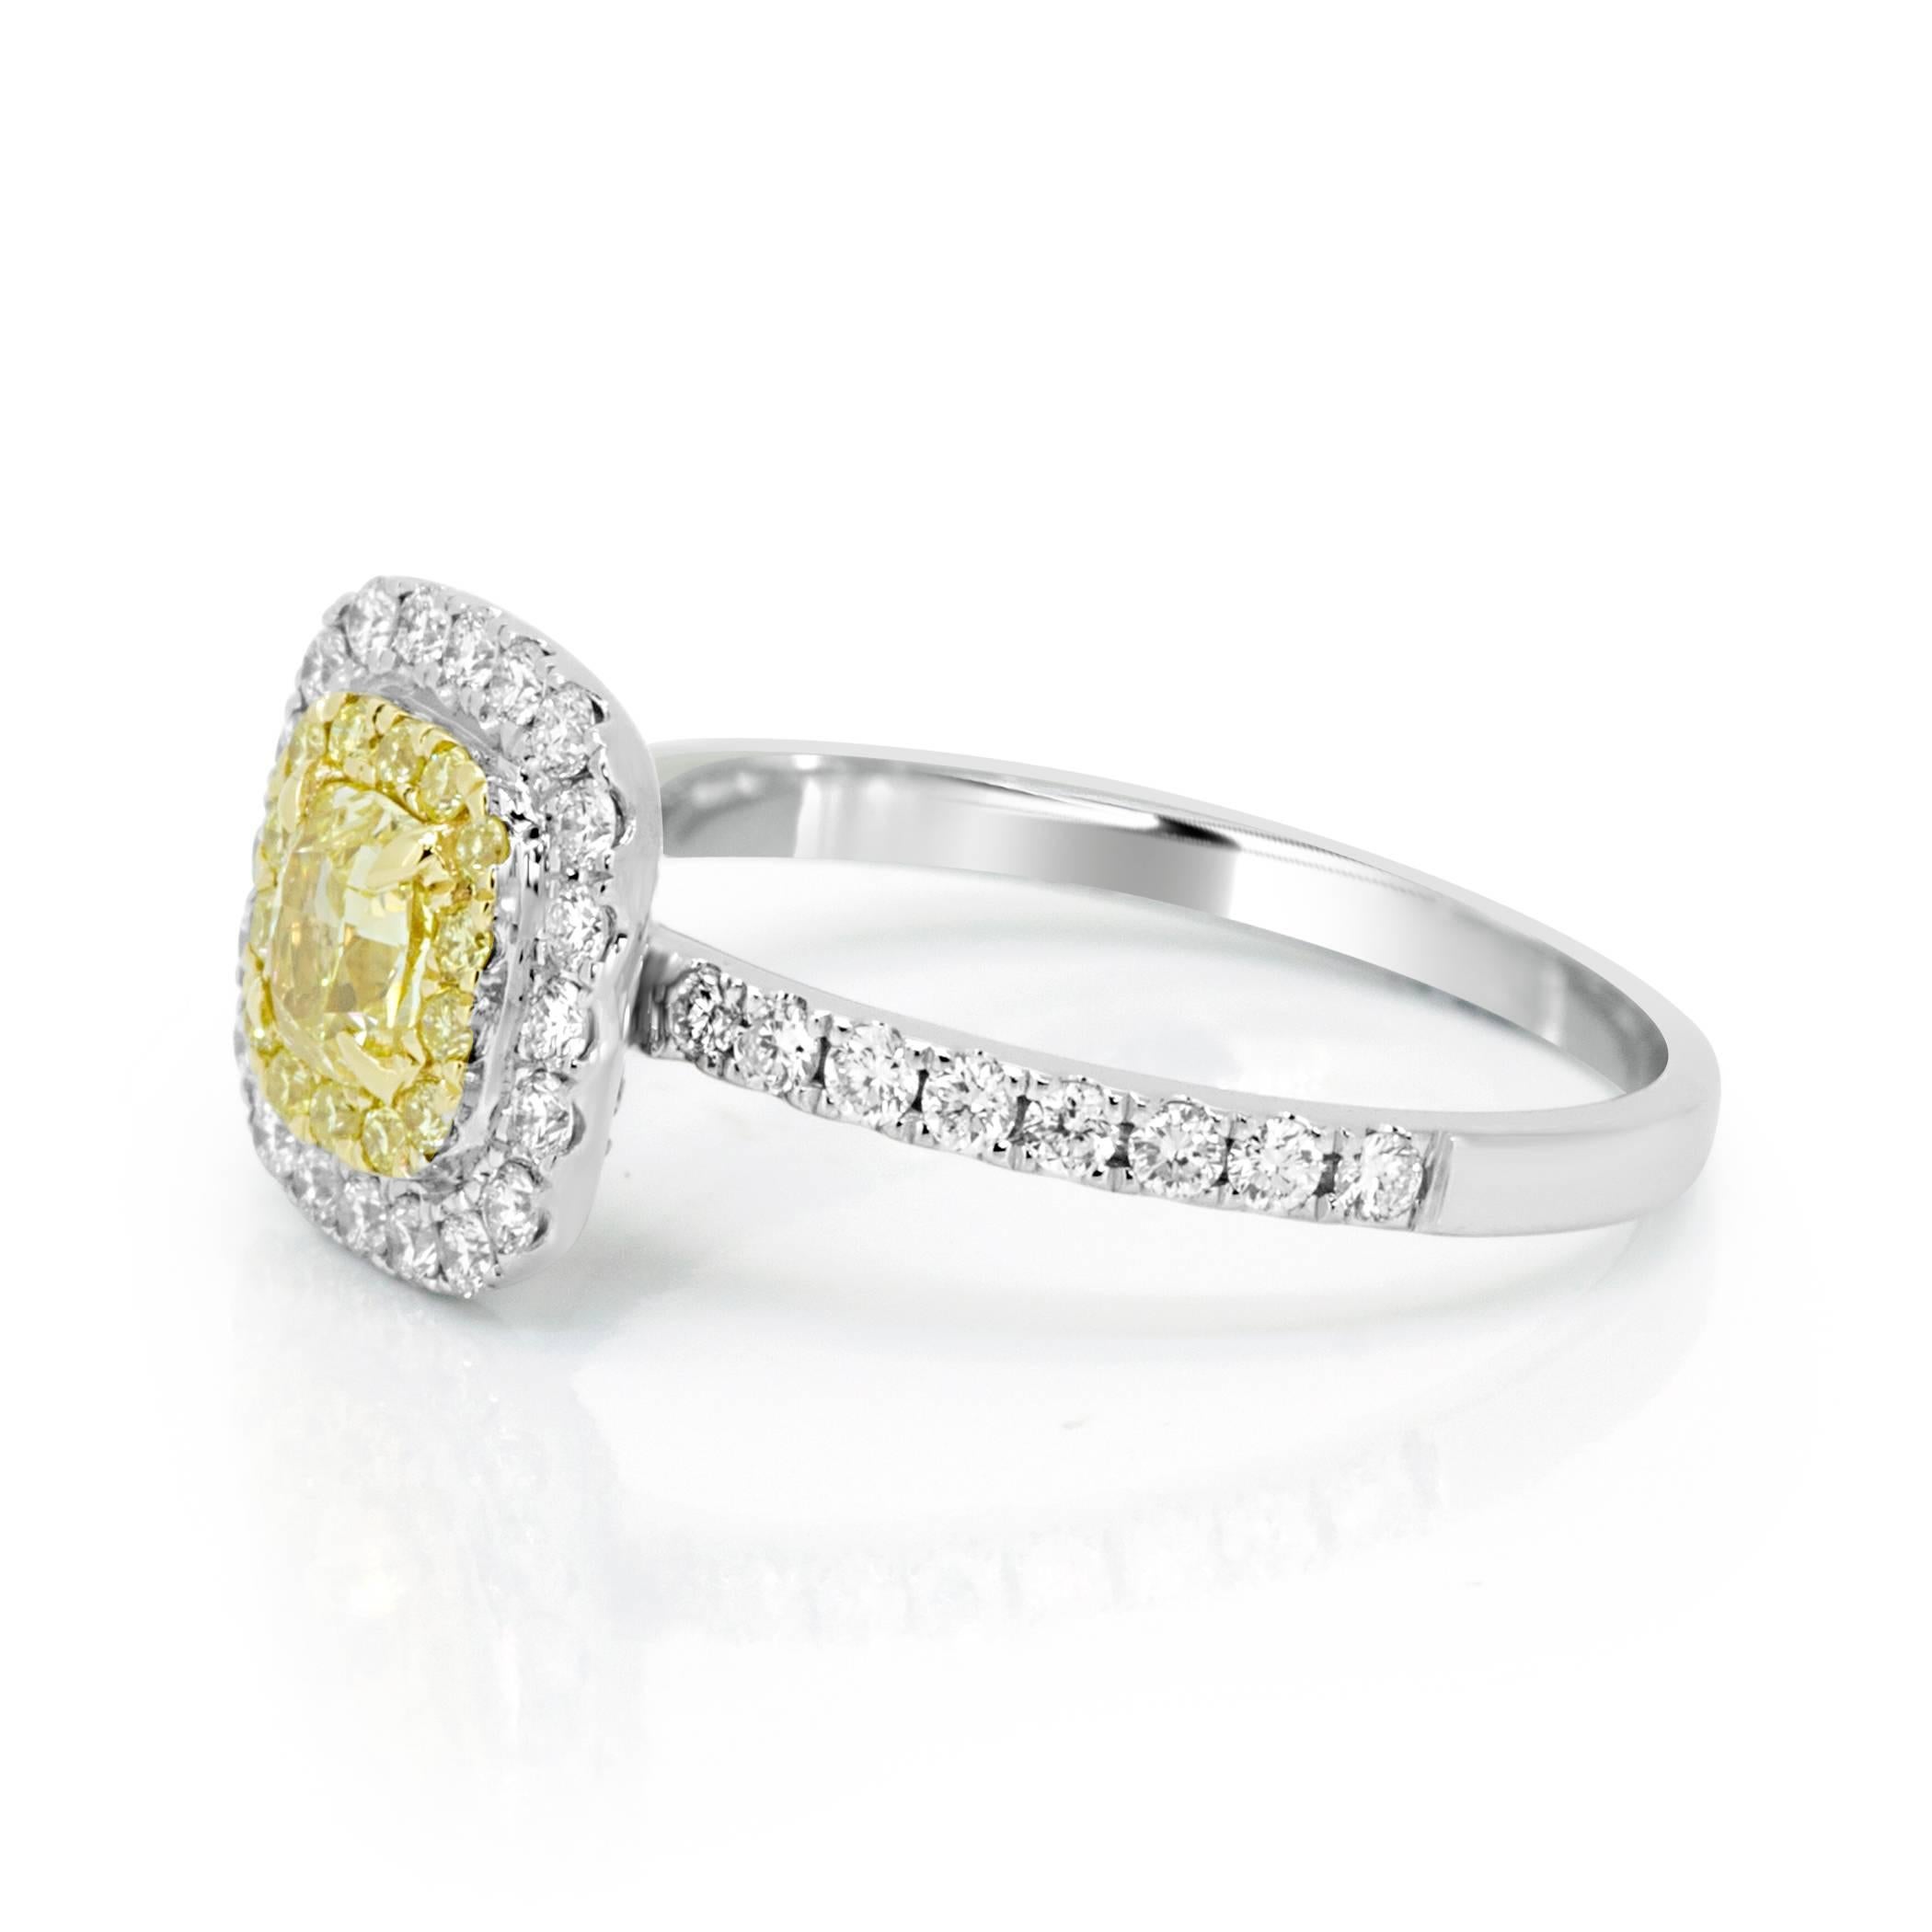 Natural Fancy Yellow Cushion 0.40 carat encircled by one row of Fancy yellow Round Diamond 0.16 Carat and one row of White Diamond 0.41 Carat in 18K White and Yellow Gold Ring with a single row shank Engagement Bridal Fashion Cocktail Ring.

Style